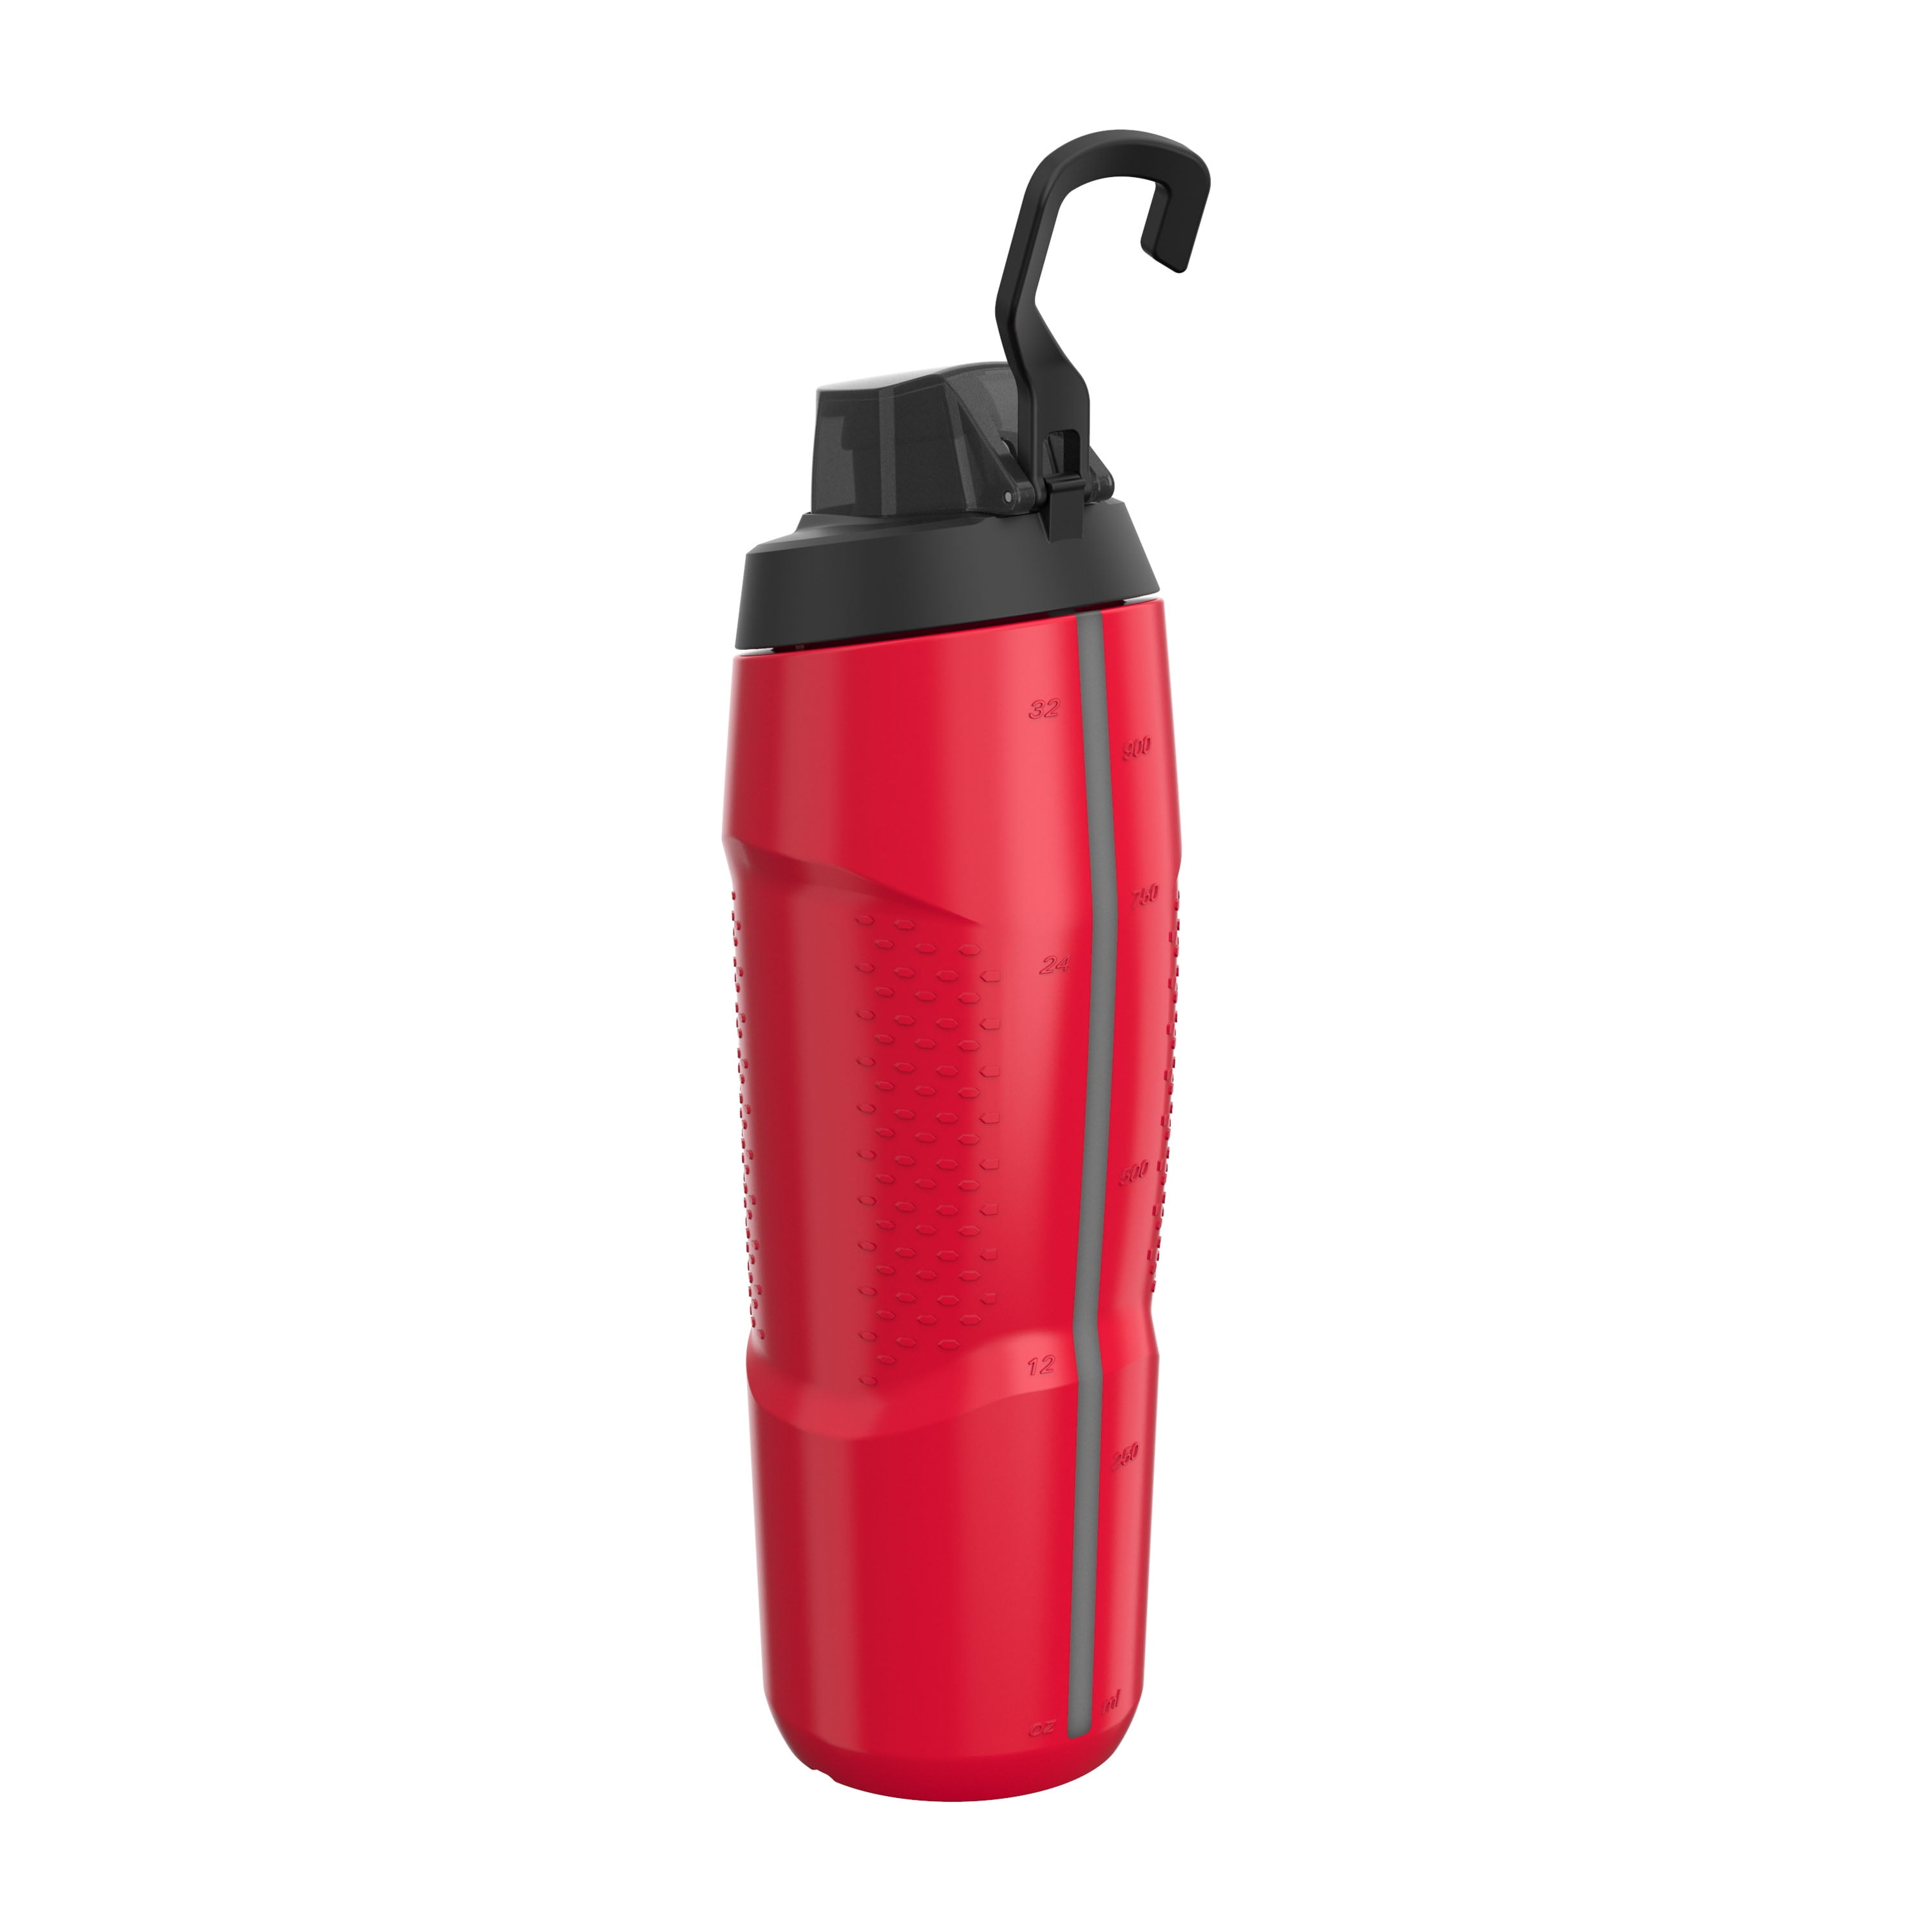 Costco Deals - 💧#thermoflask #kids #14oz #waterbottles are